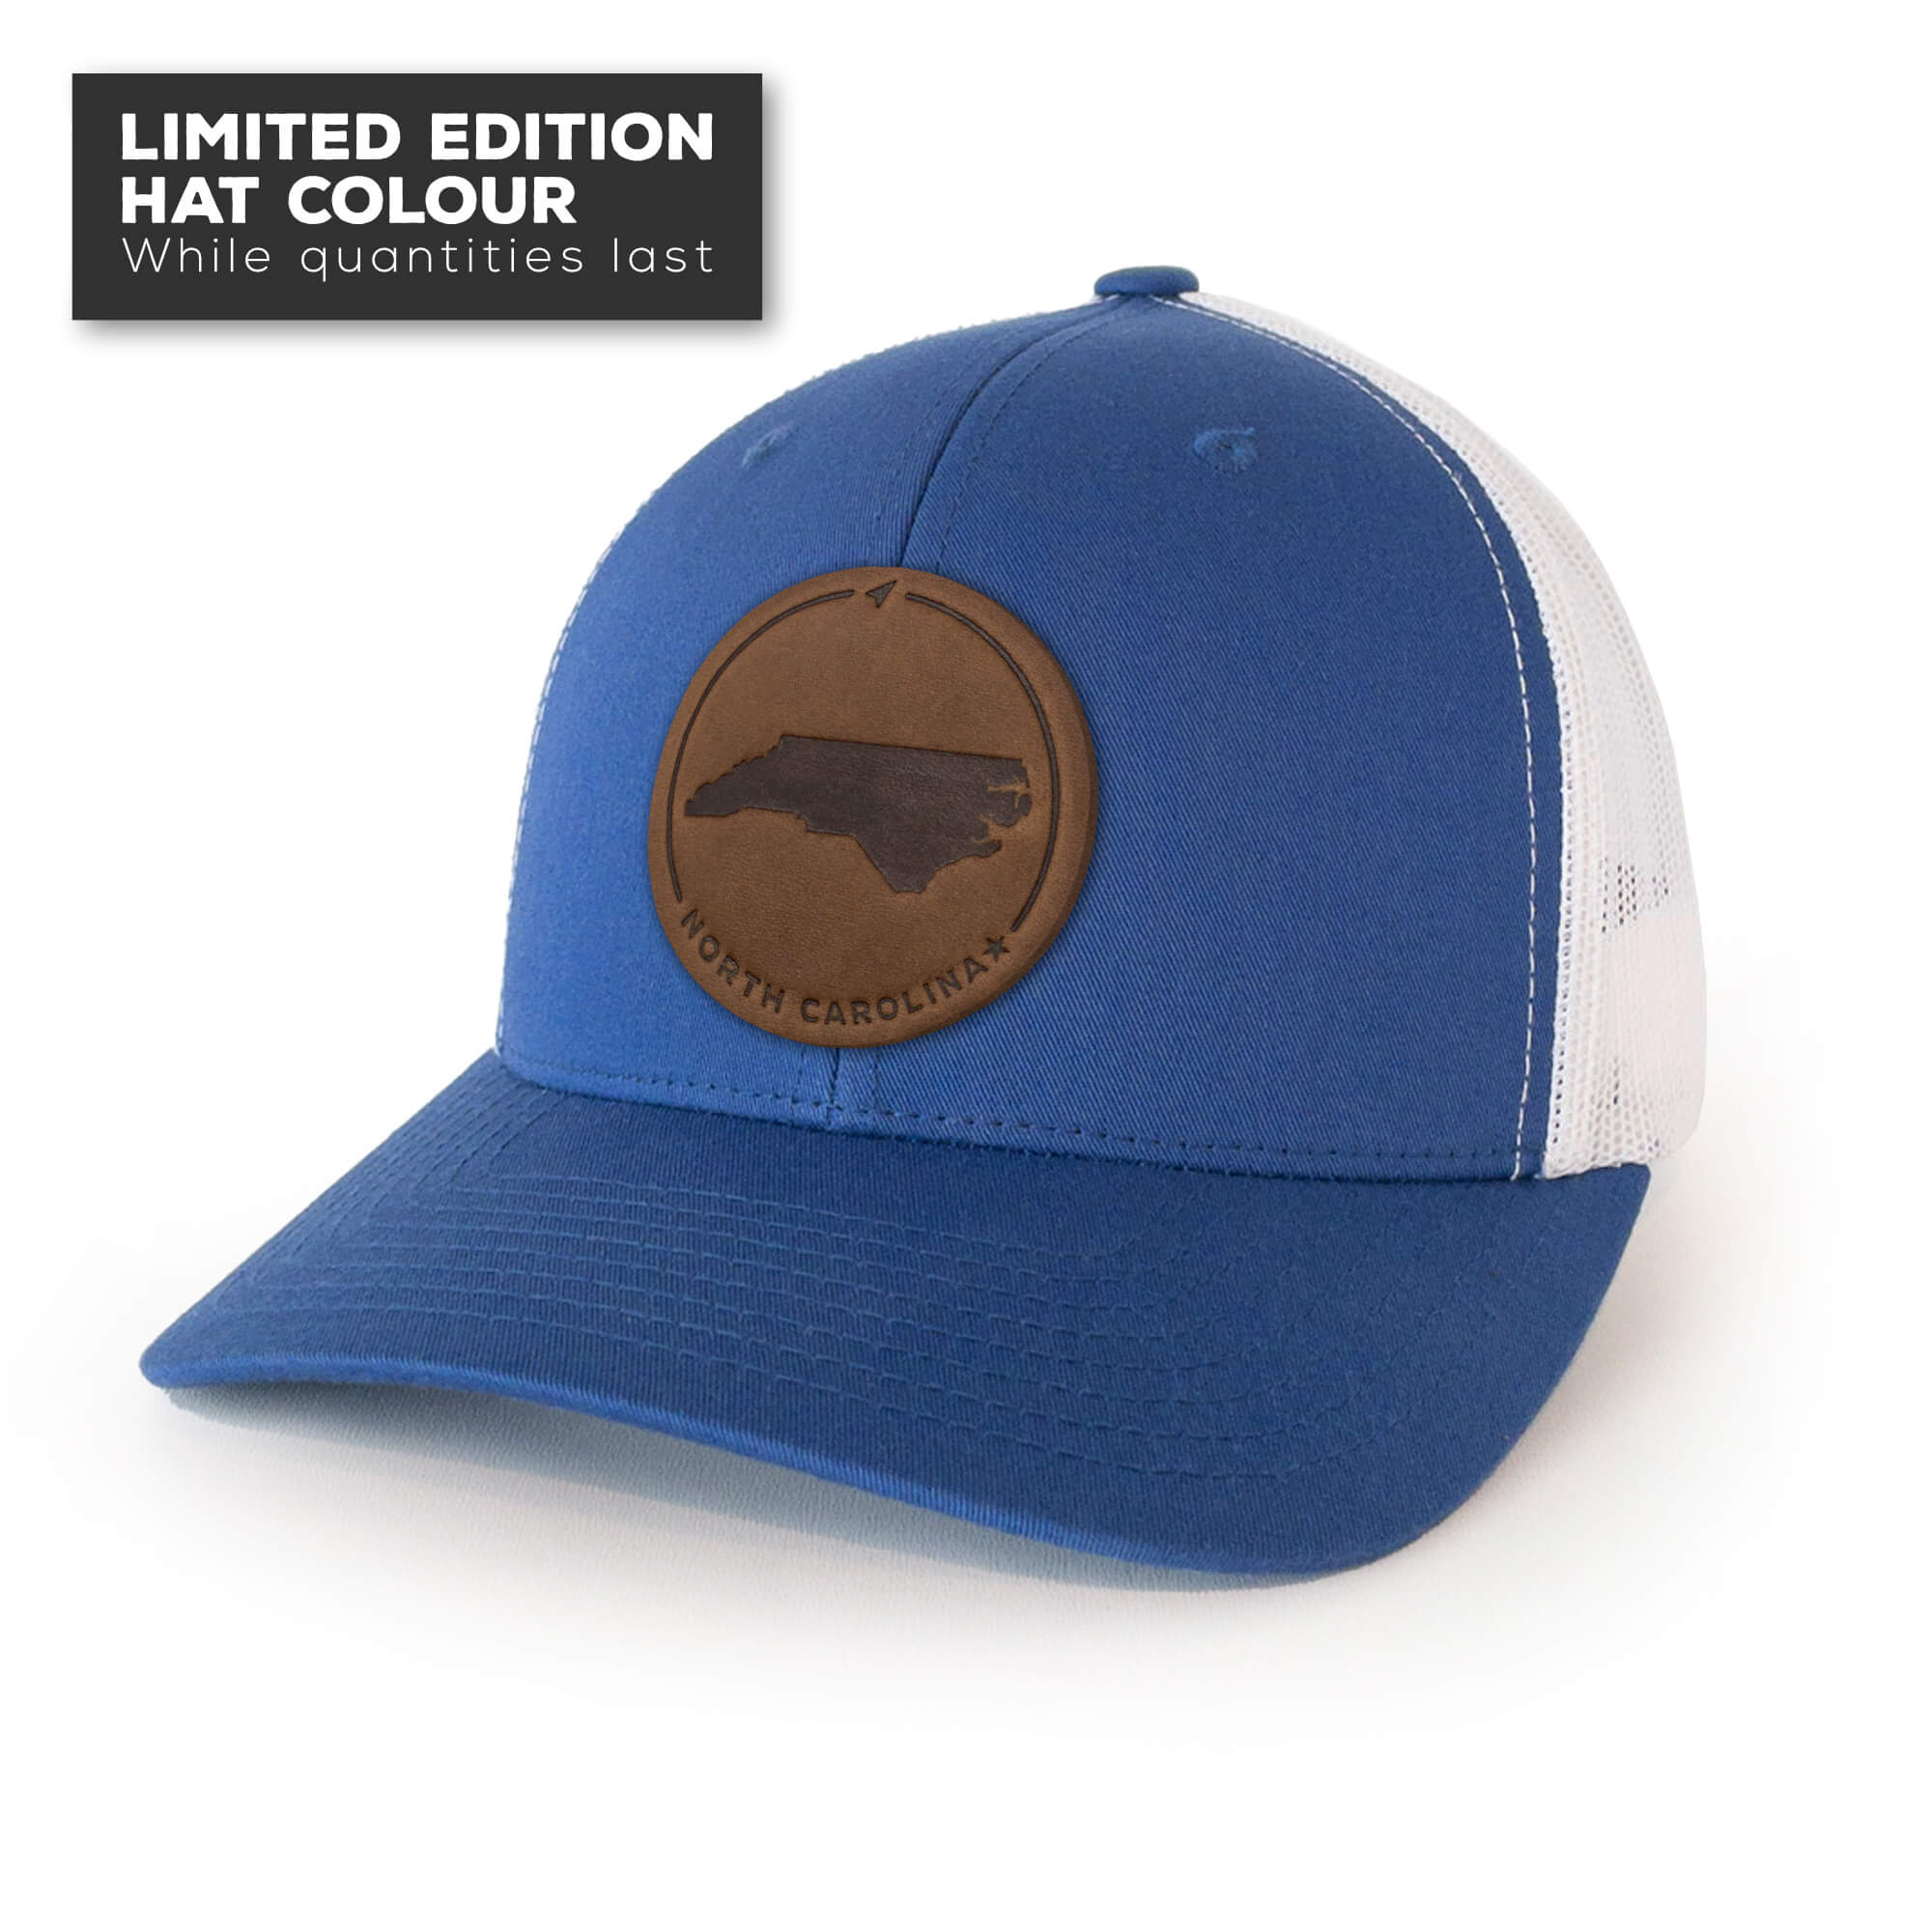 Royal Blue trucker hat with full-grain leather patch of North Carolina